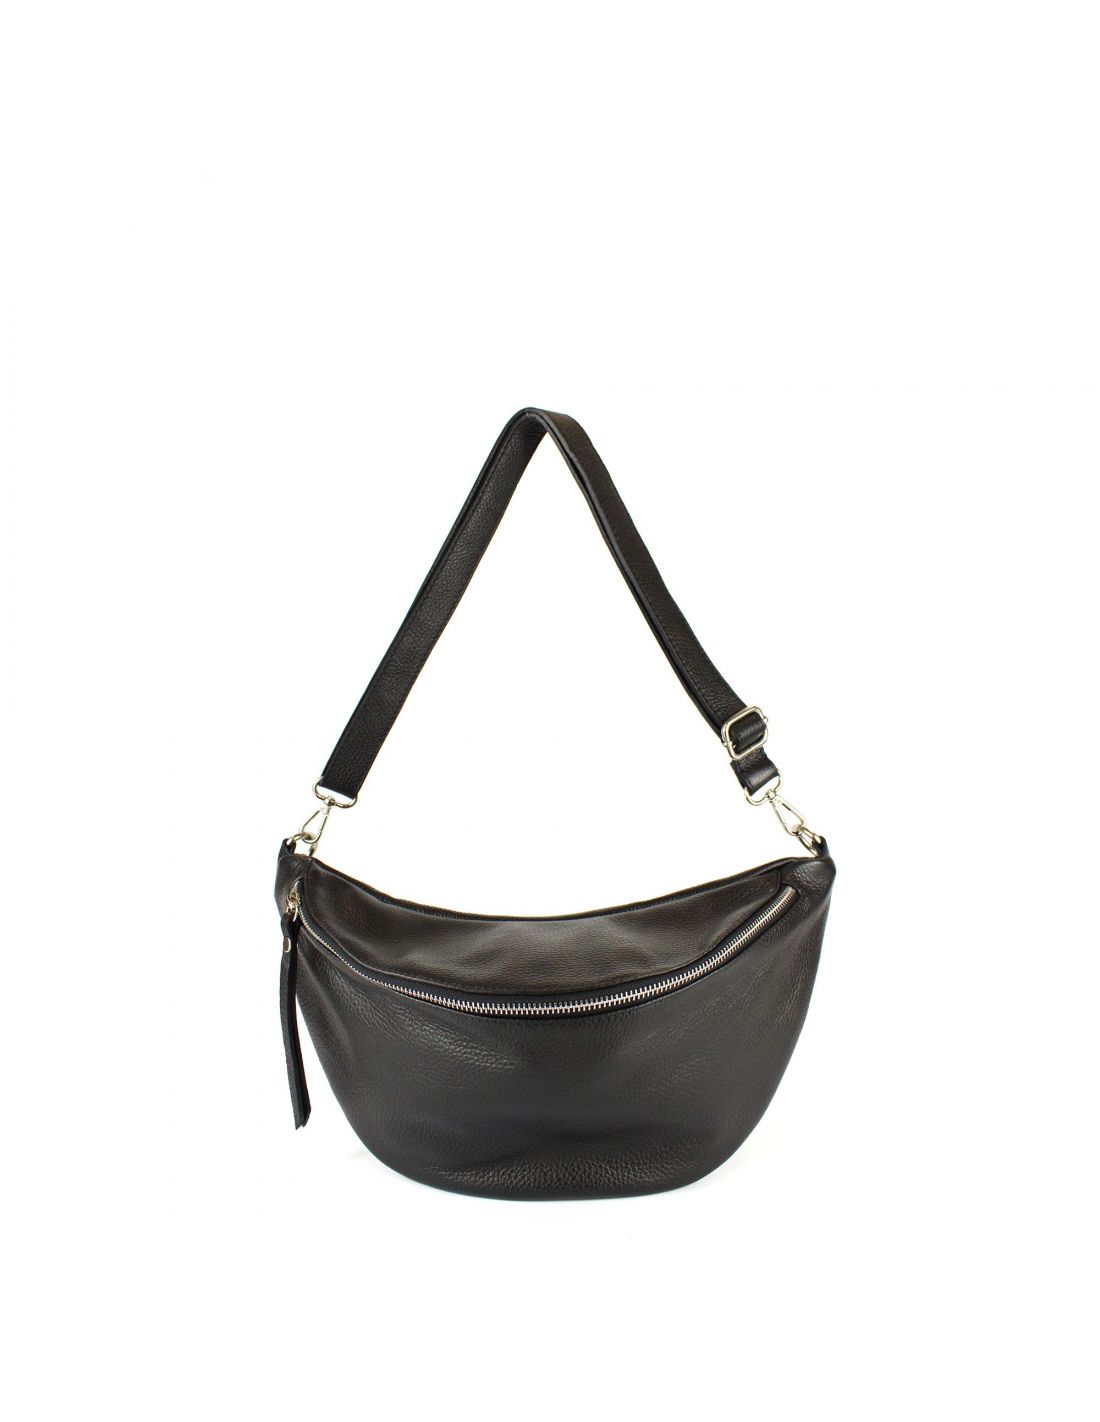 Belt bag in genuine leather made in Italy